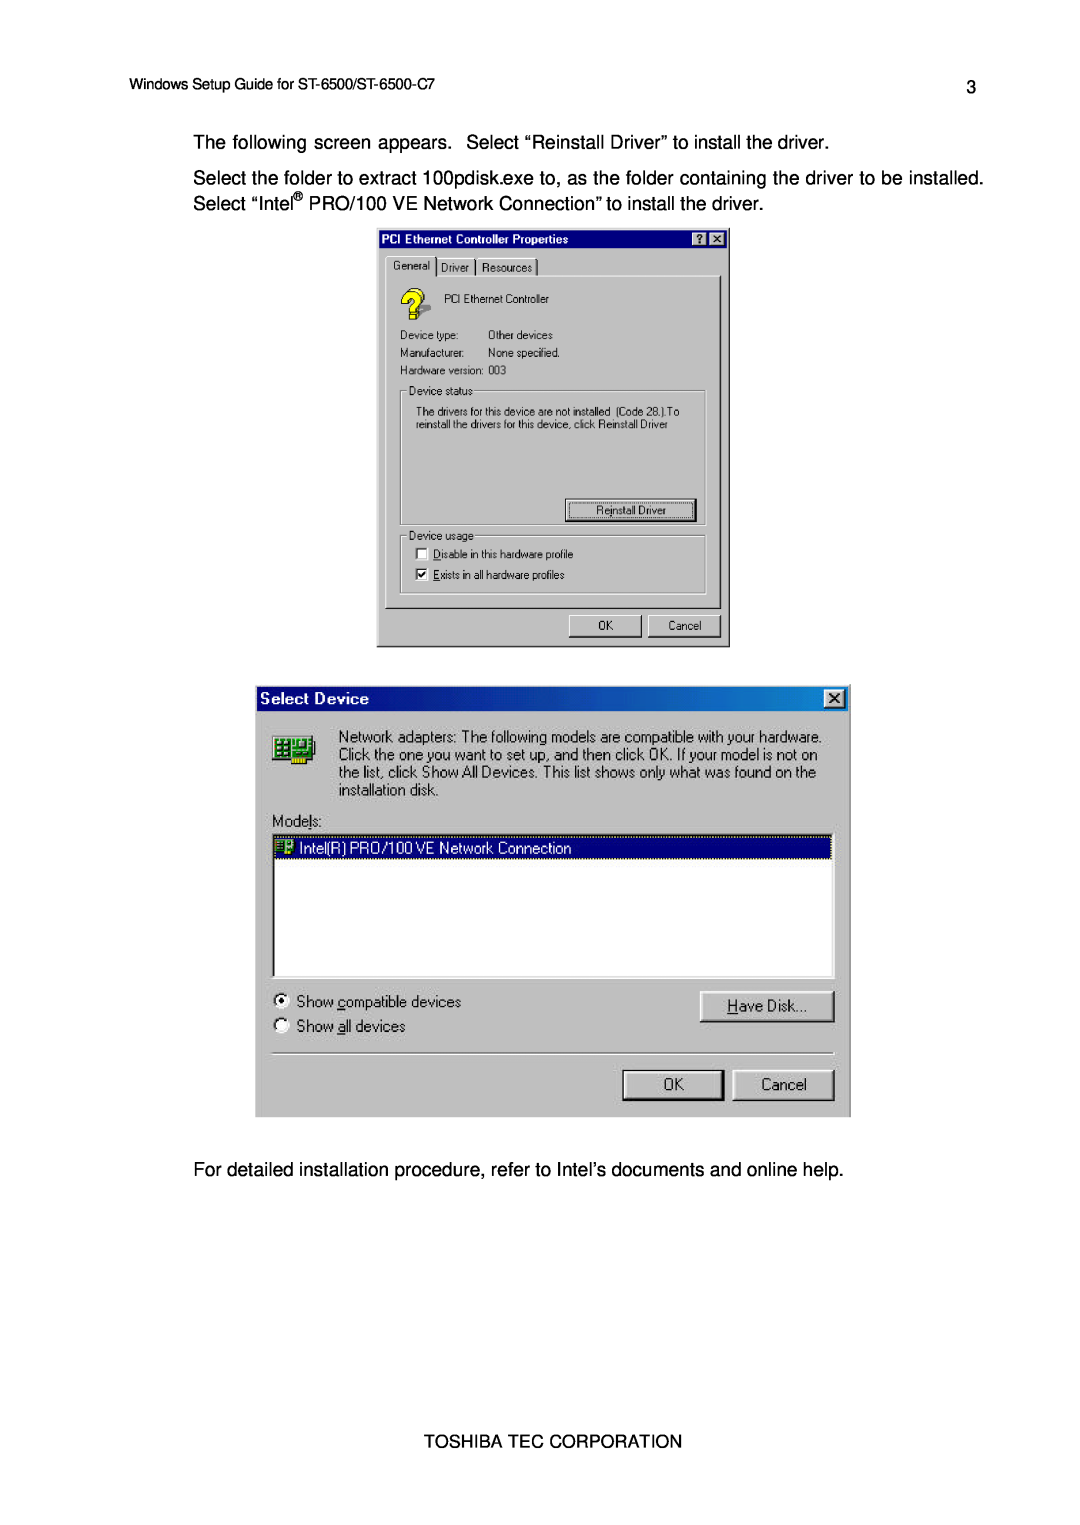 Toshiba E2711 setup guide The following screen appears. Select “Reinstall Driver” to install the driver 